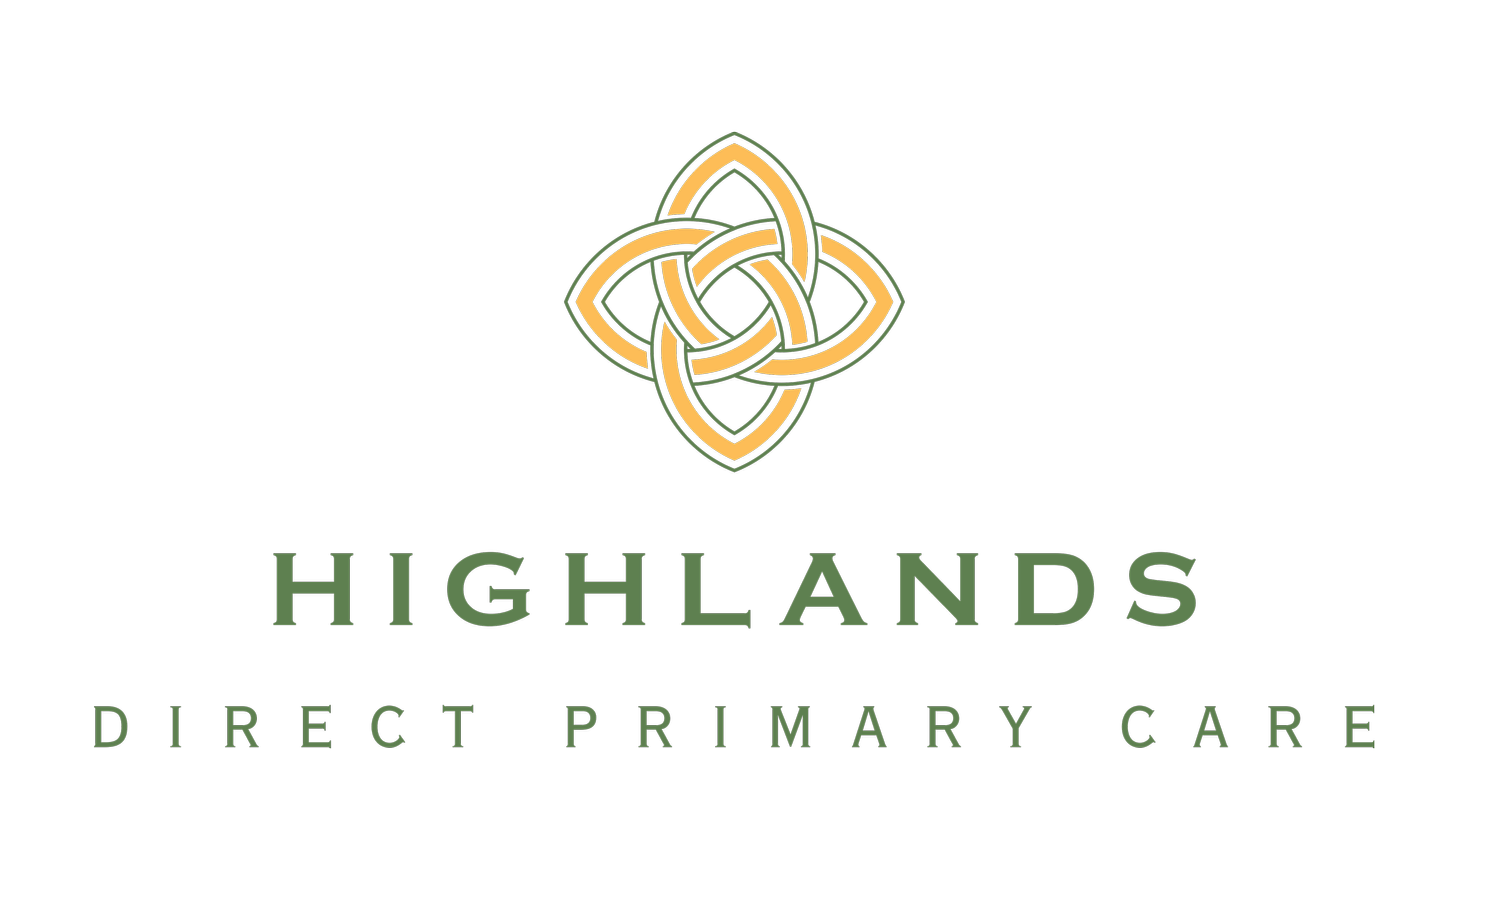 Highlands Direct Primary Care